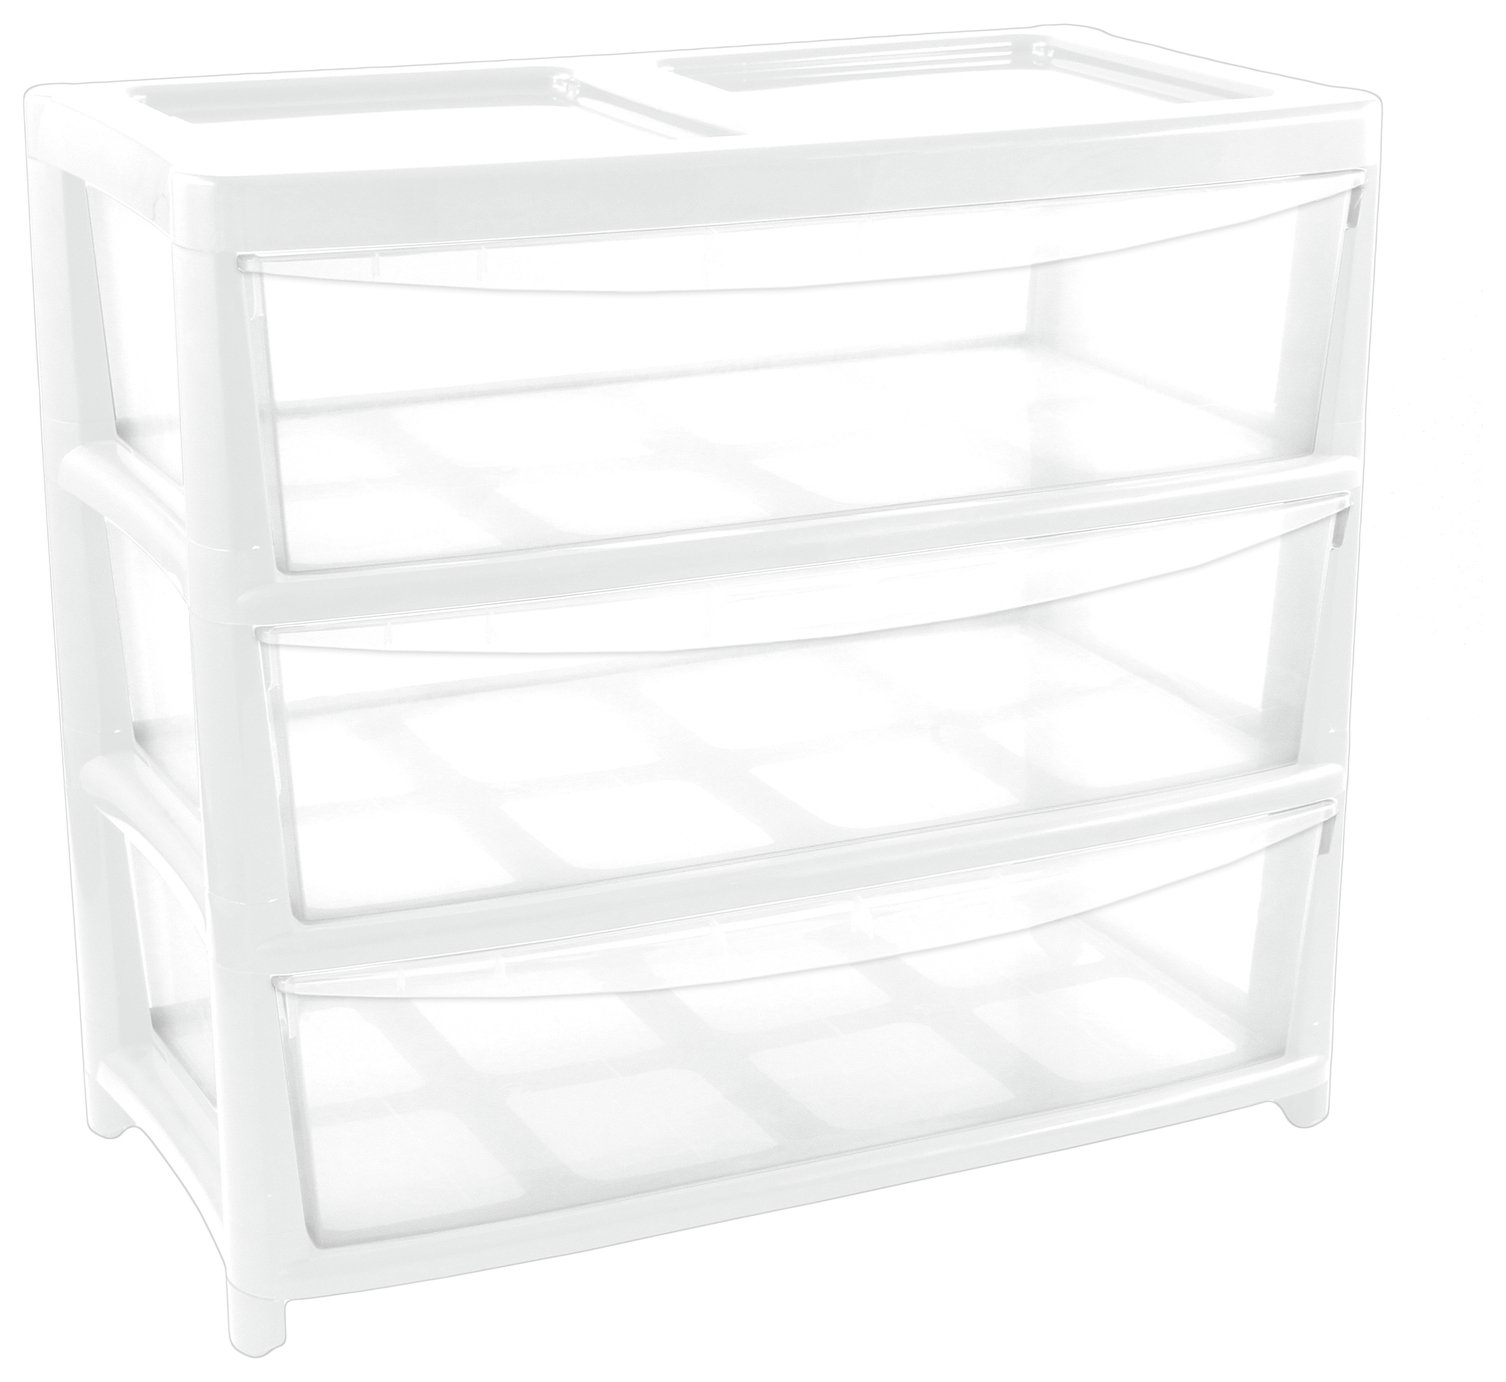 Argos Home 3 Drawer Extra Wide Gloss Plastic Drawers - White